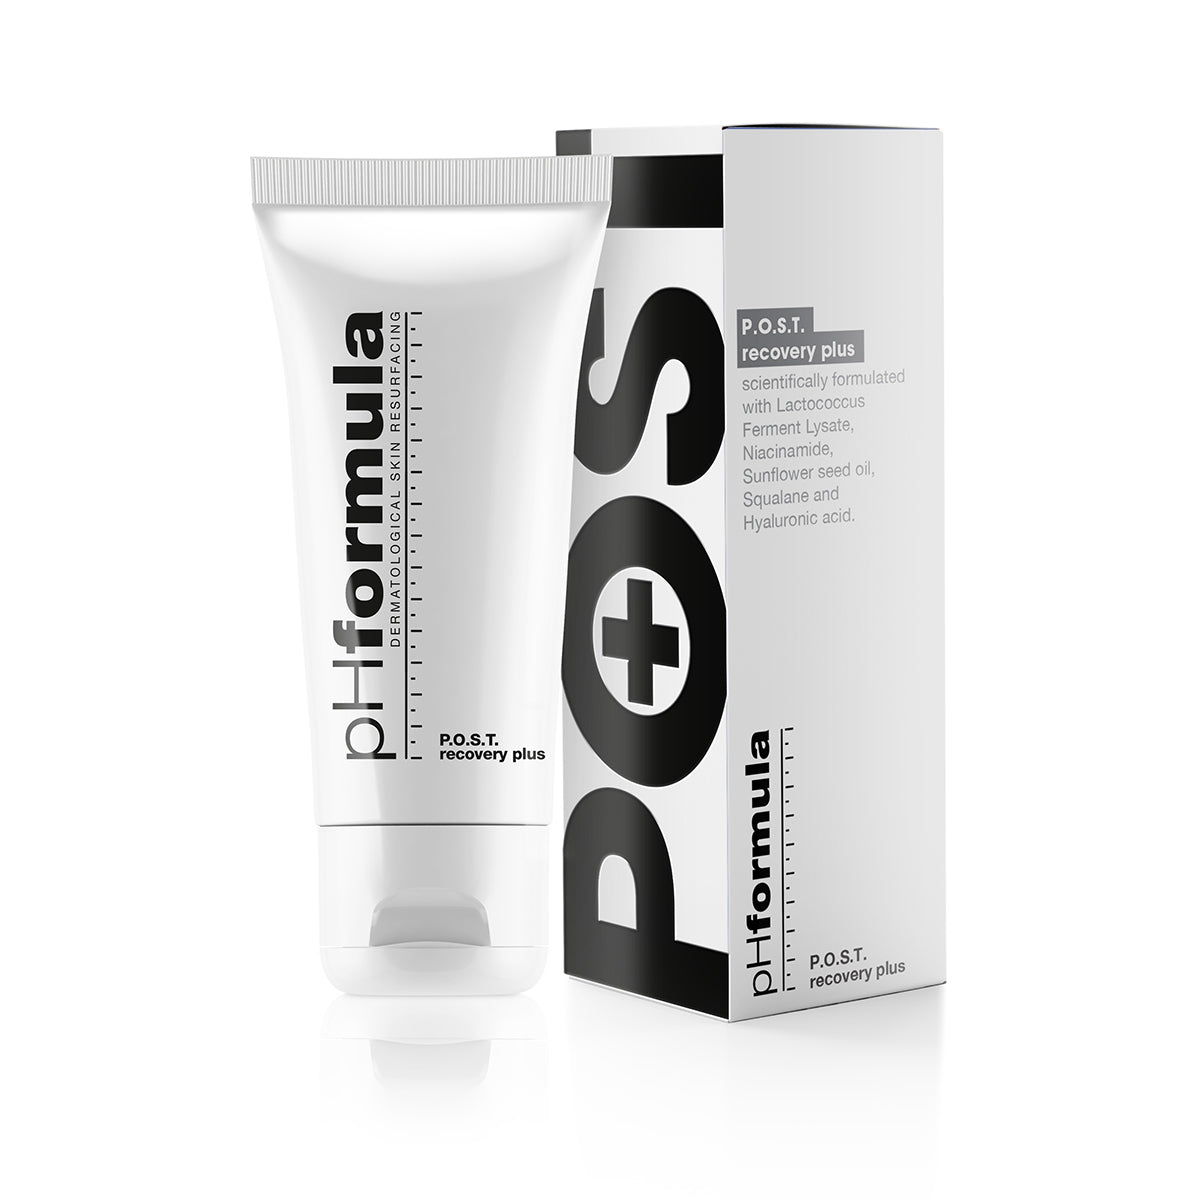 P.O.S.T. recovery plus-50ml